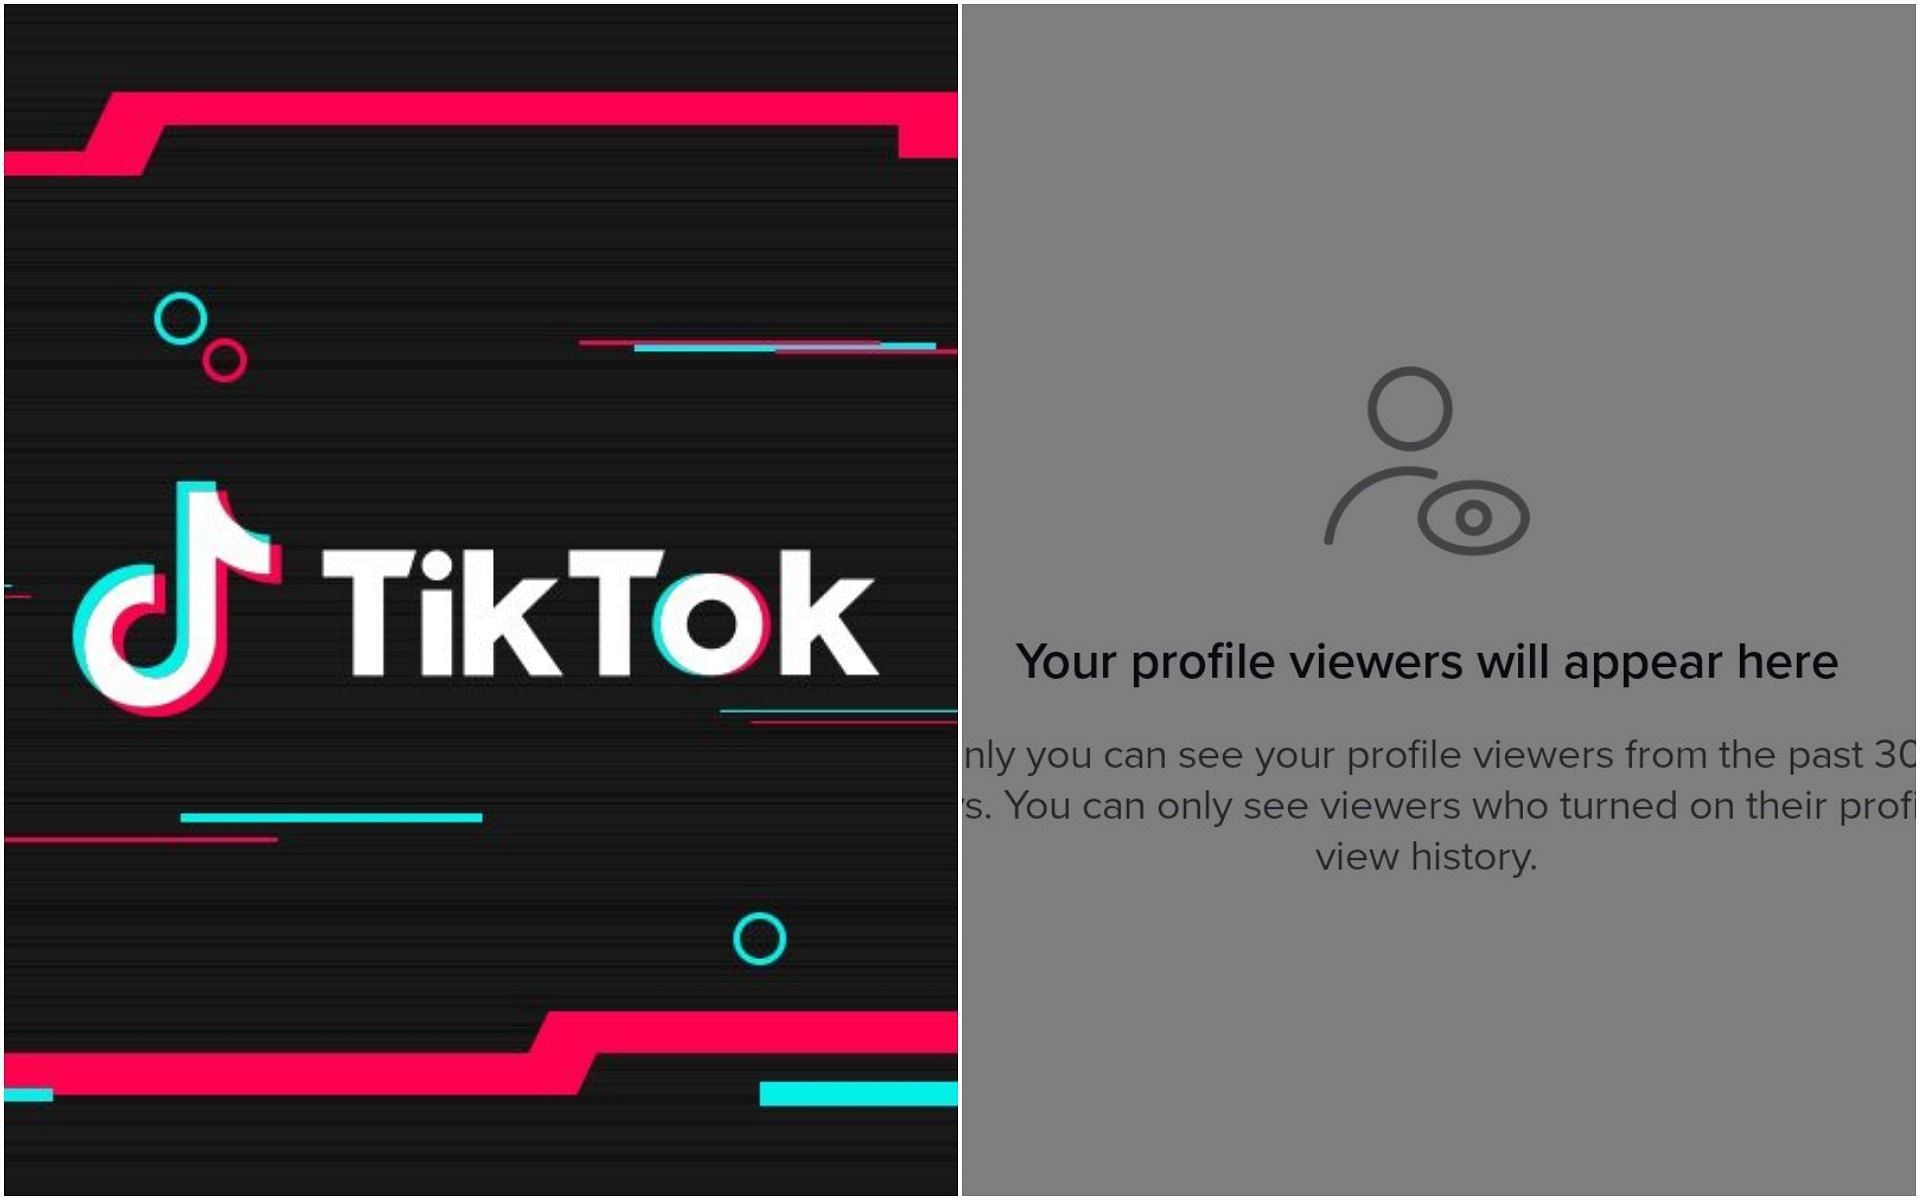 How Does Profile View History Work On Tiktok? Here Is A Step By Step Guide On How To Use The Feature